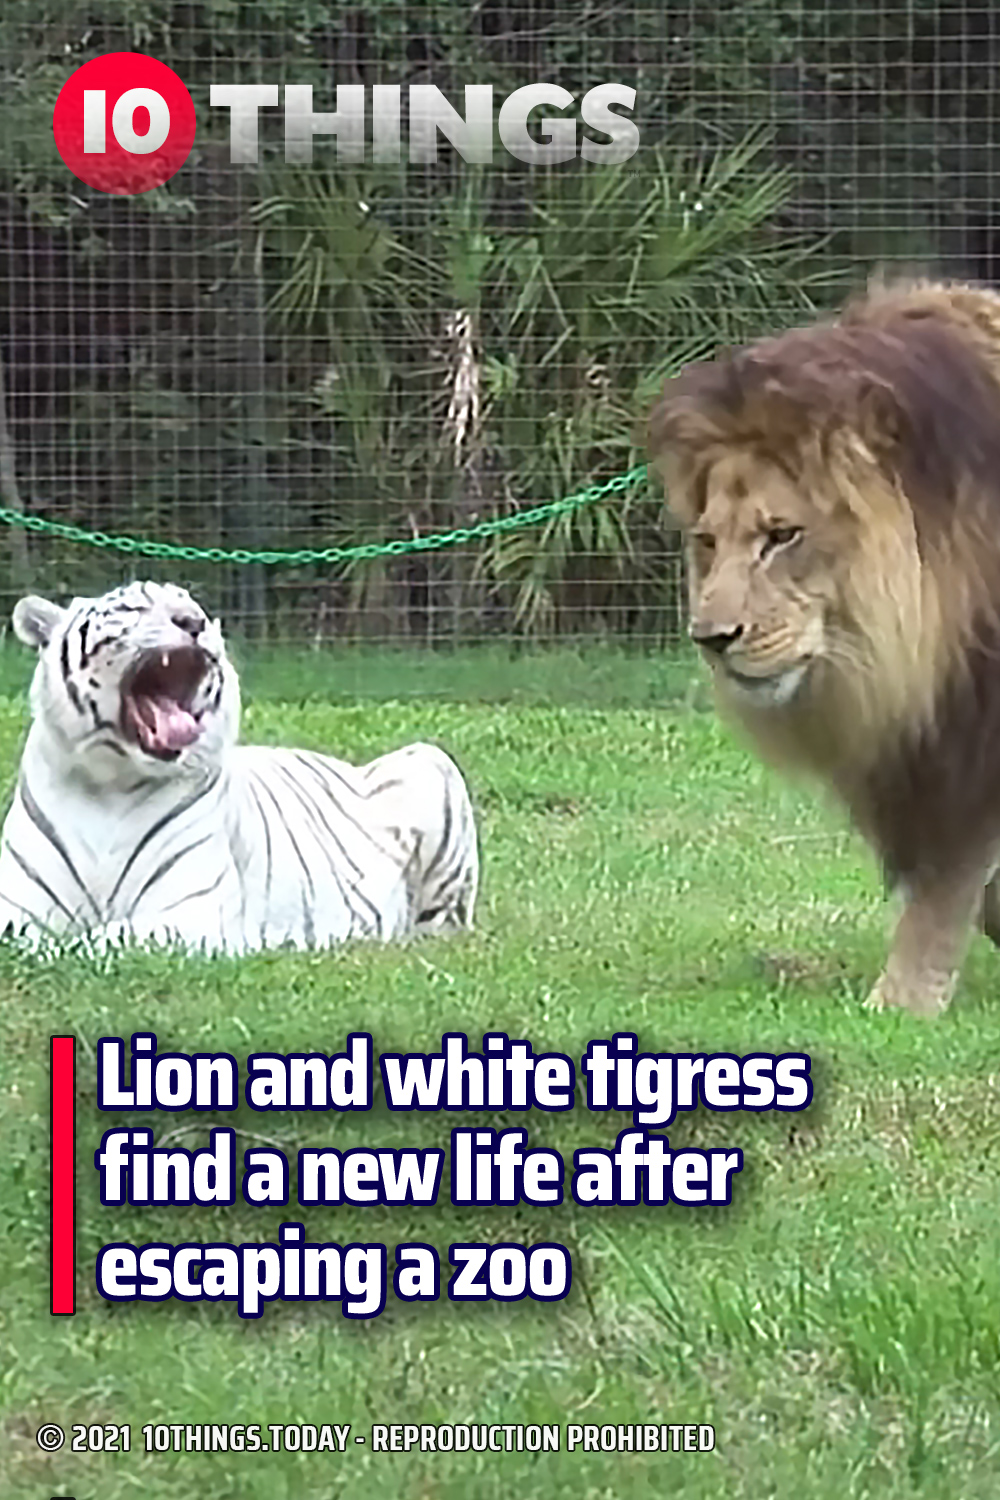 Lion and white tigress find a new life after escaping a zoo